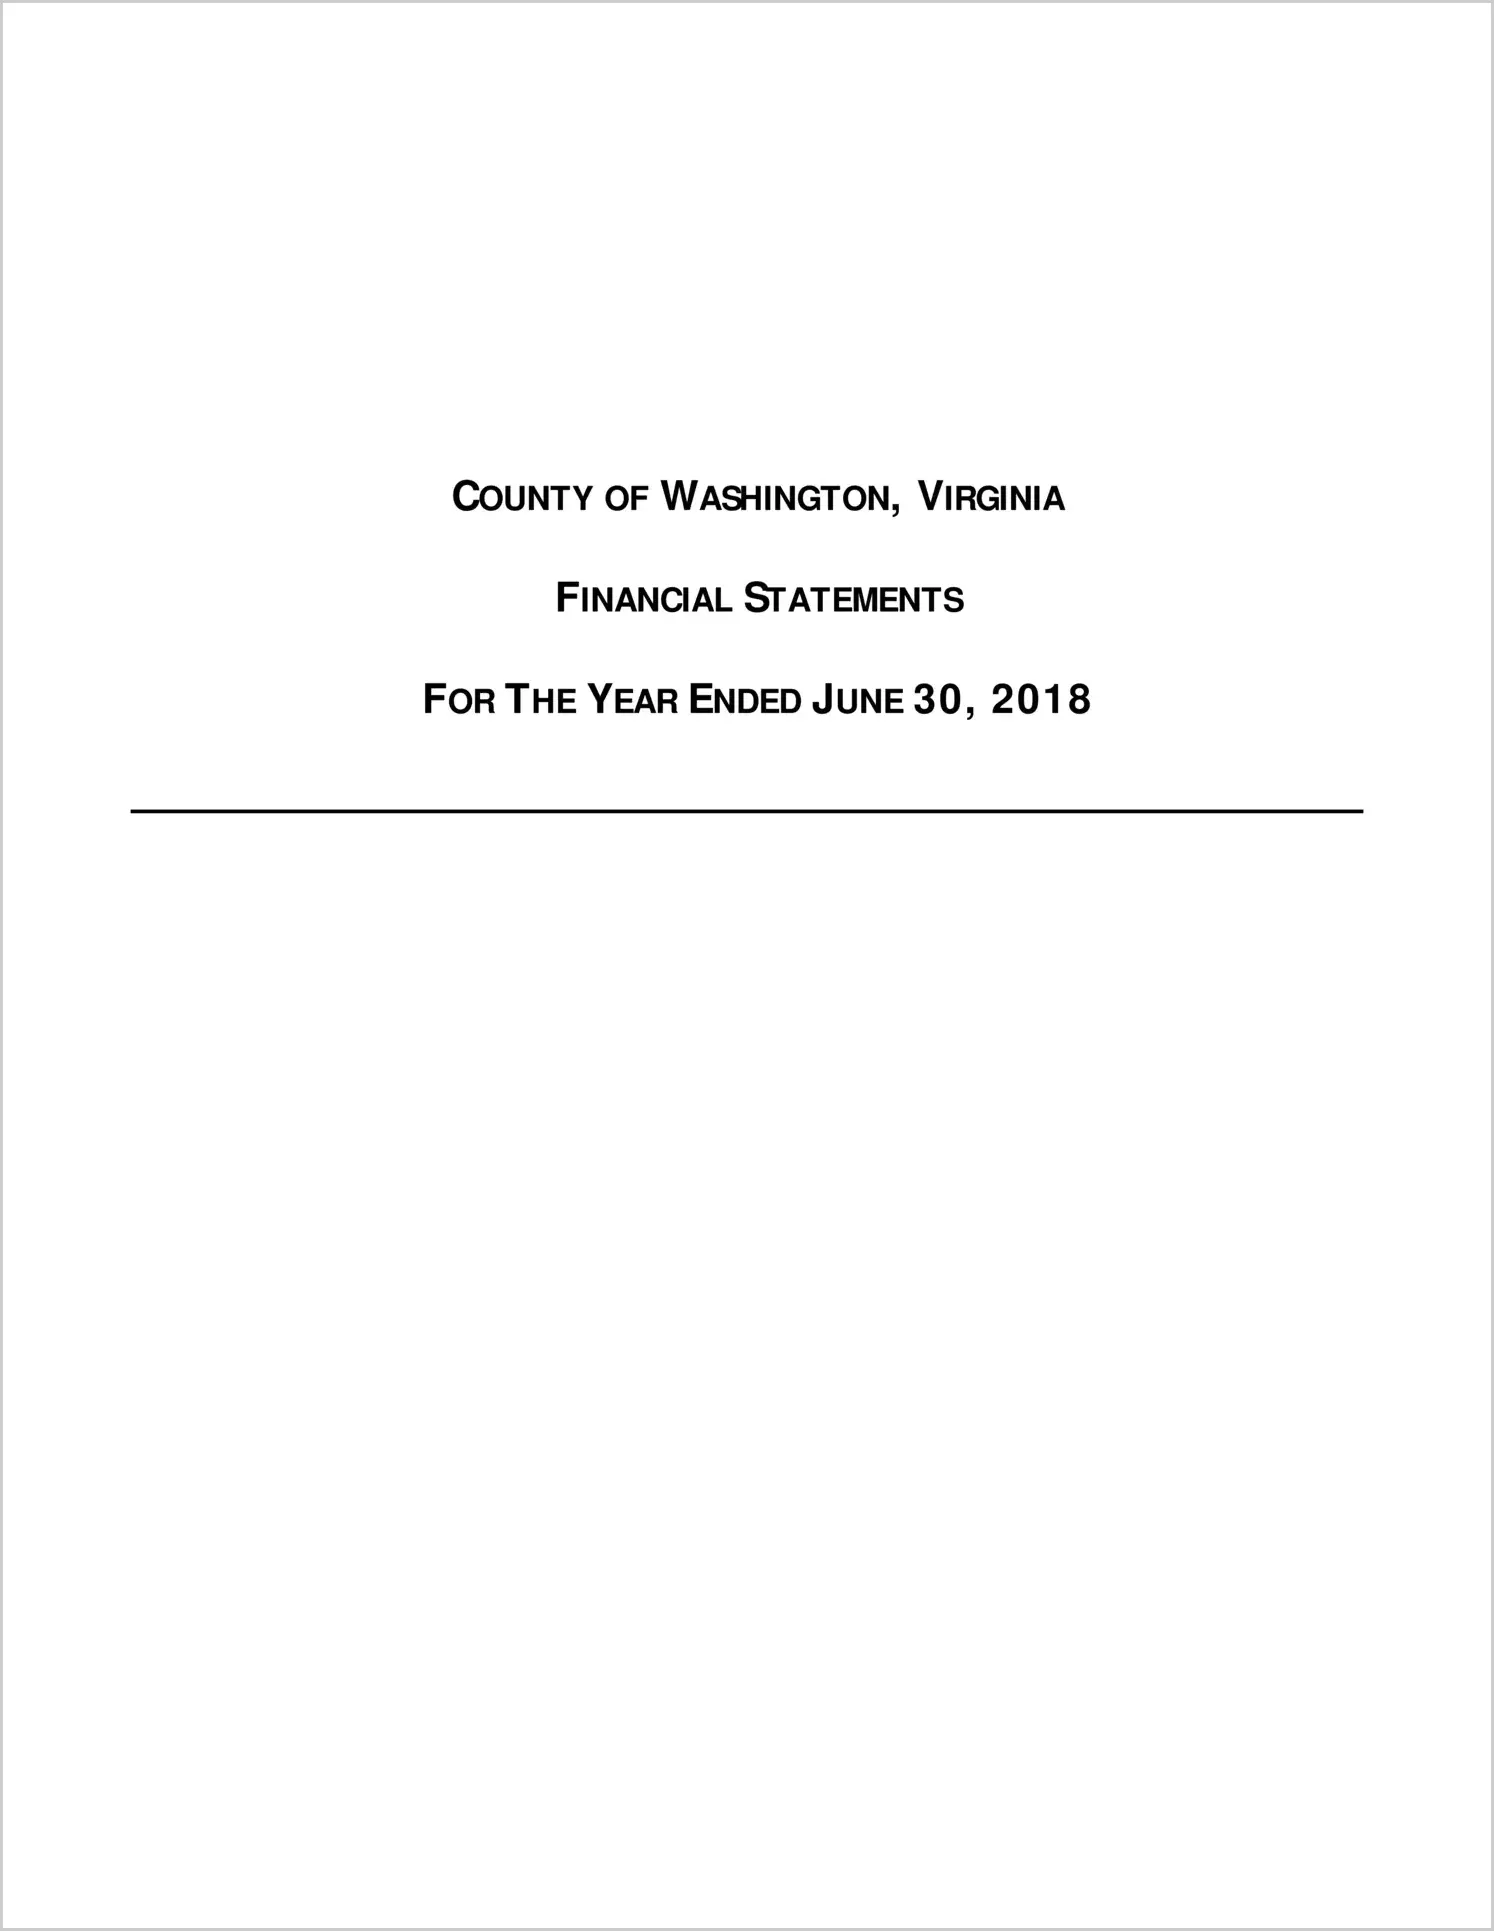 2018 Annual Financial Report for County of Washington